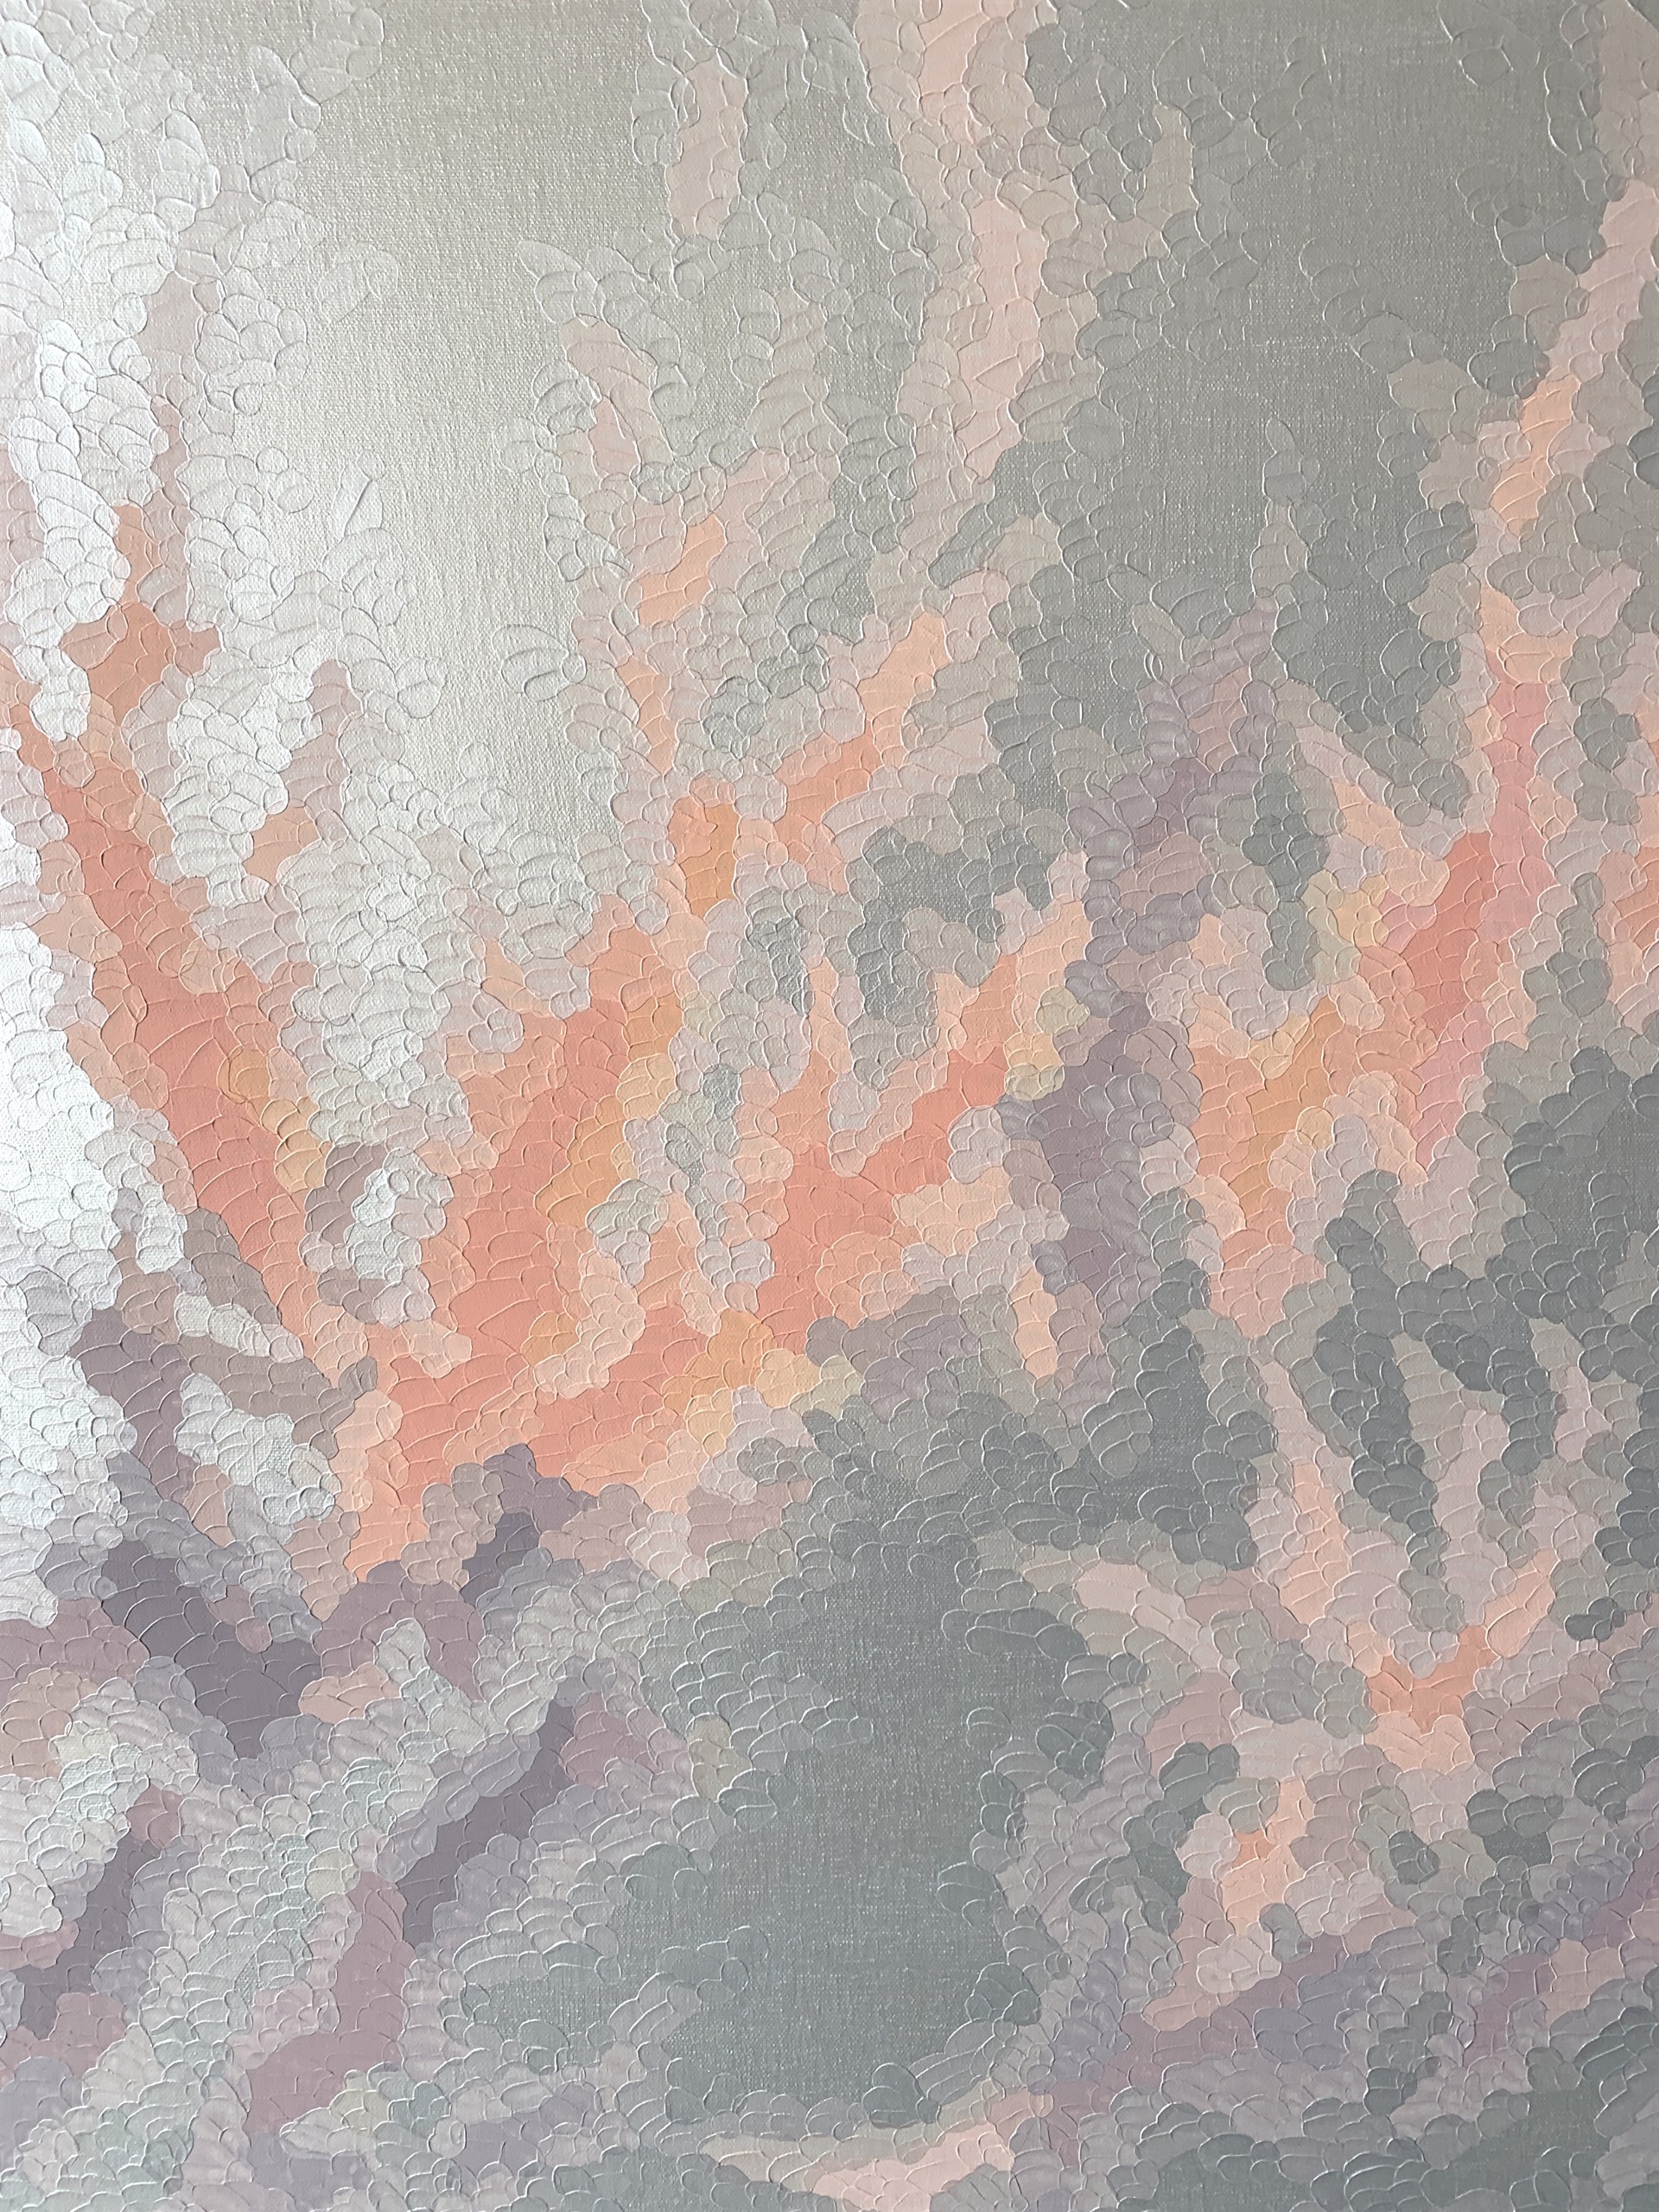 Into a Coral Sky (pearl) by Elaine Coombs